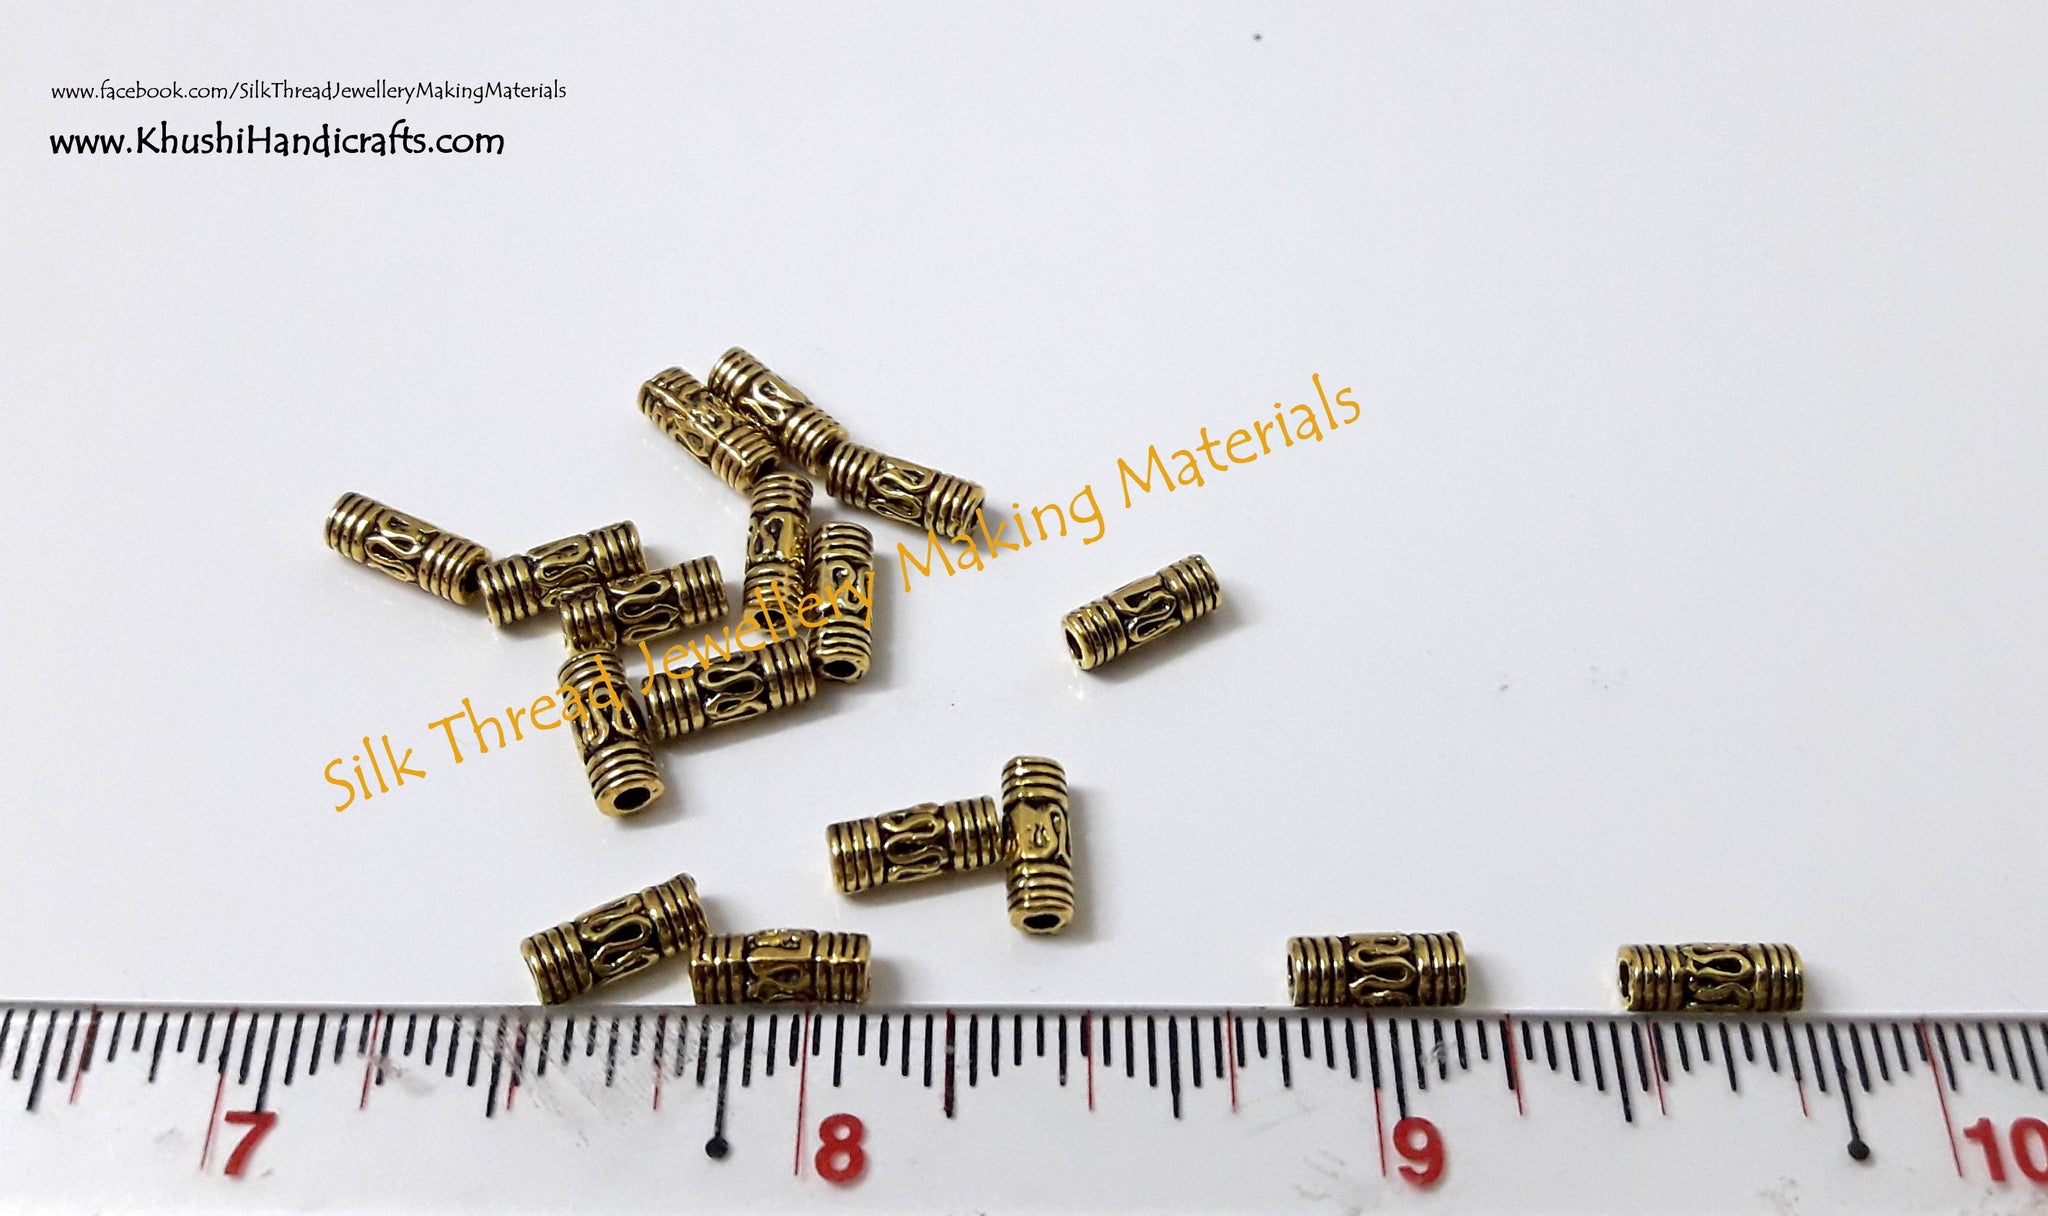 Antique Gold Tube spacer beads.Sold as a single piece!